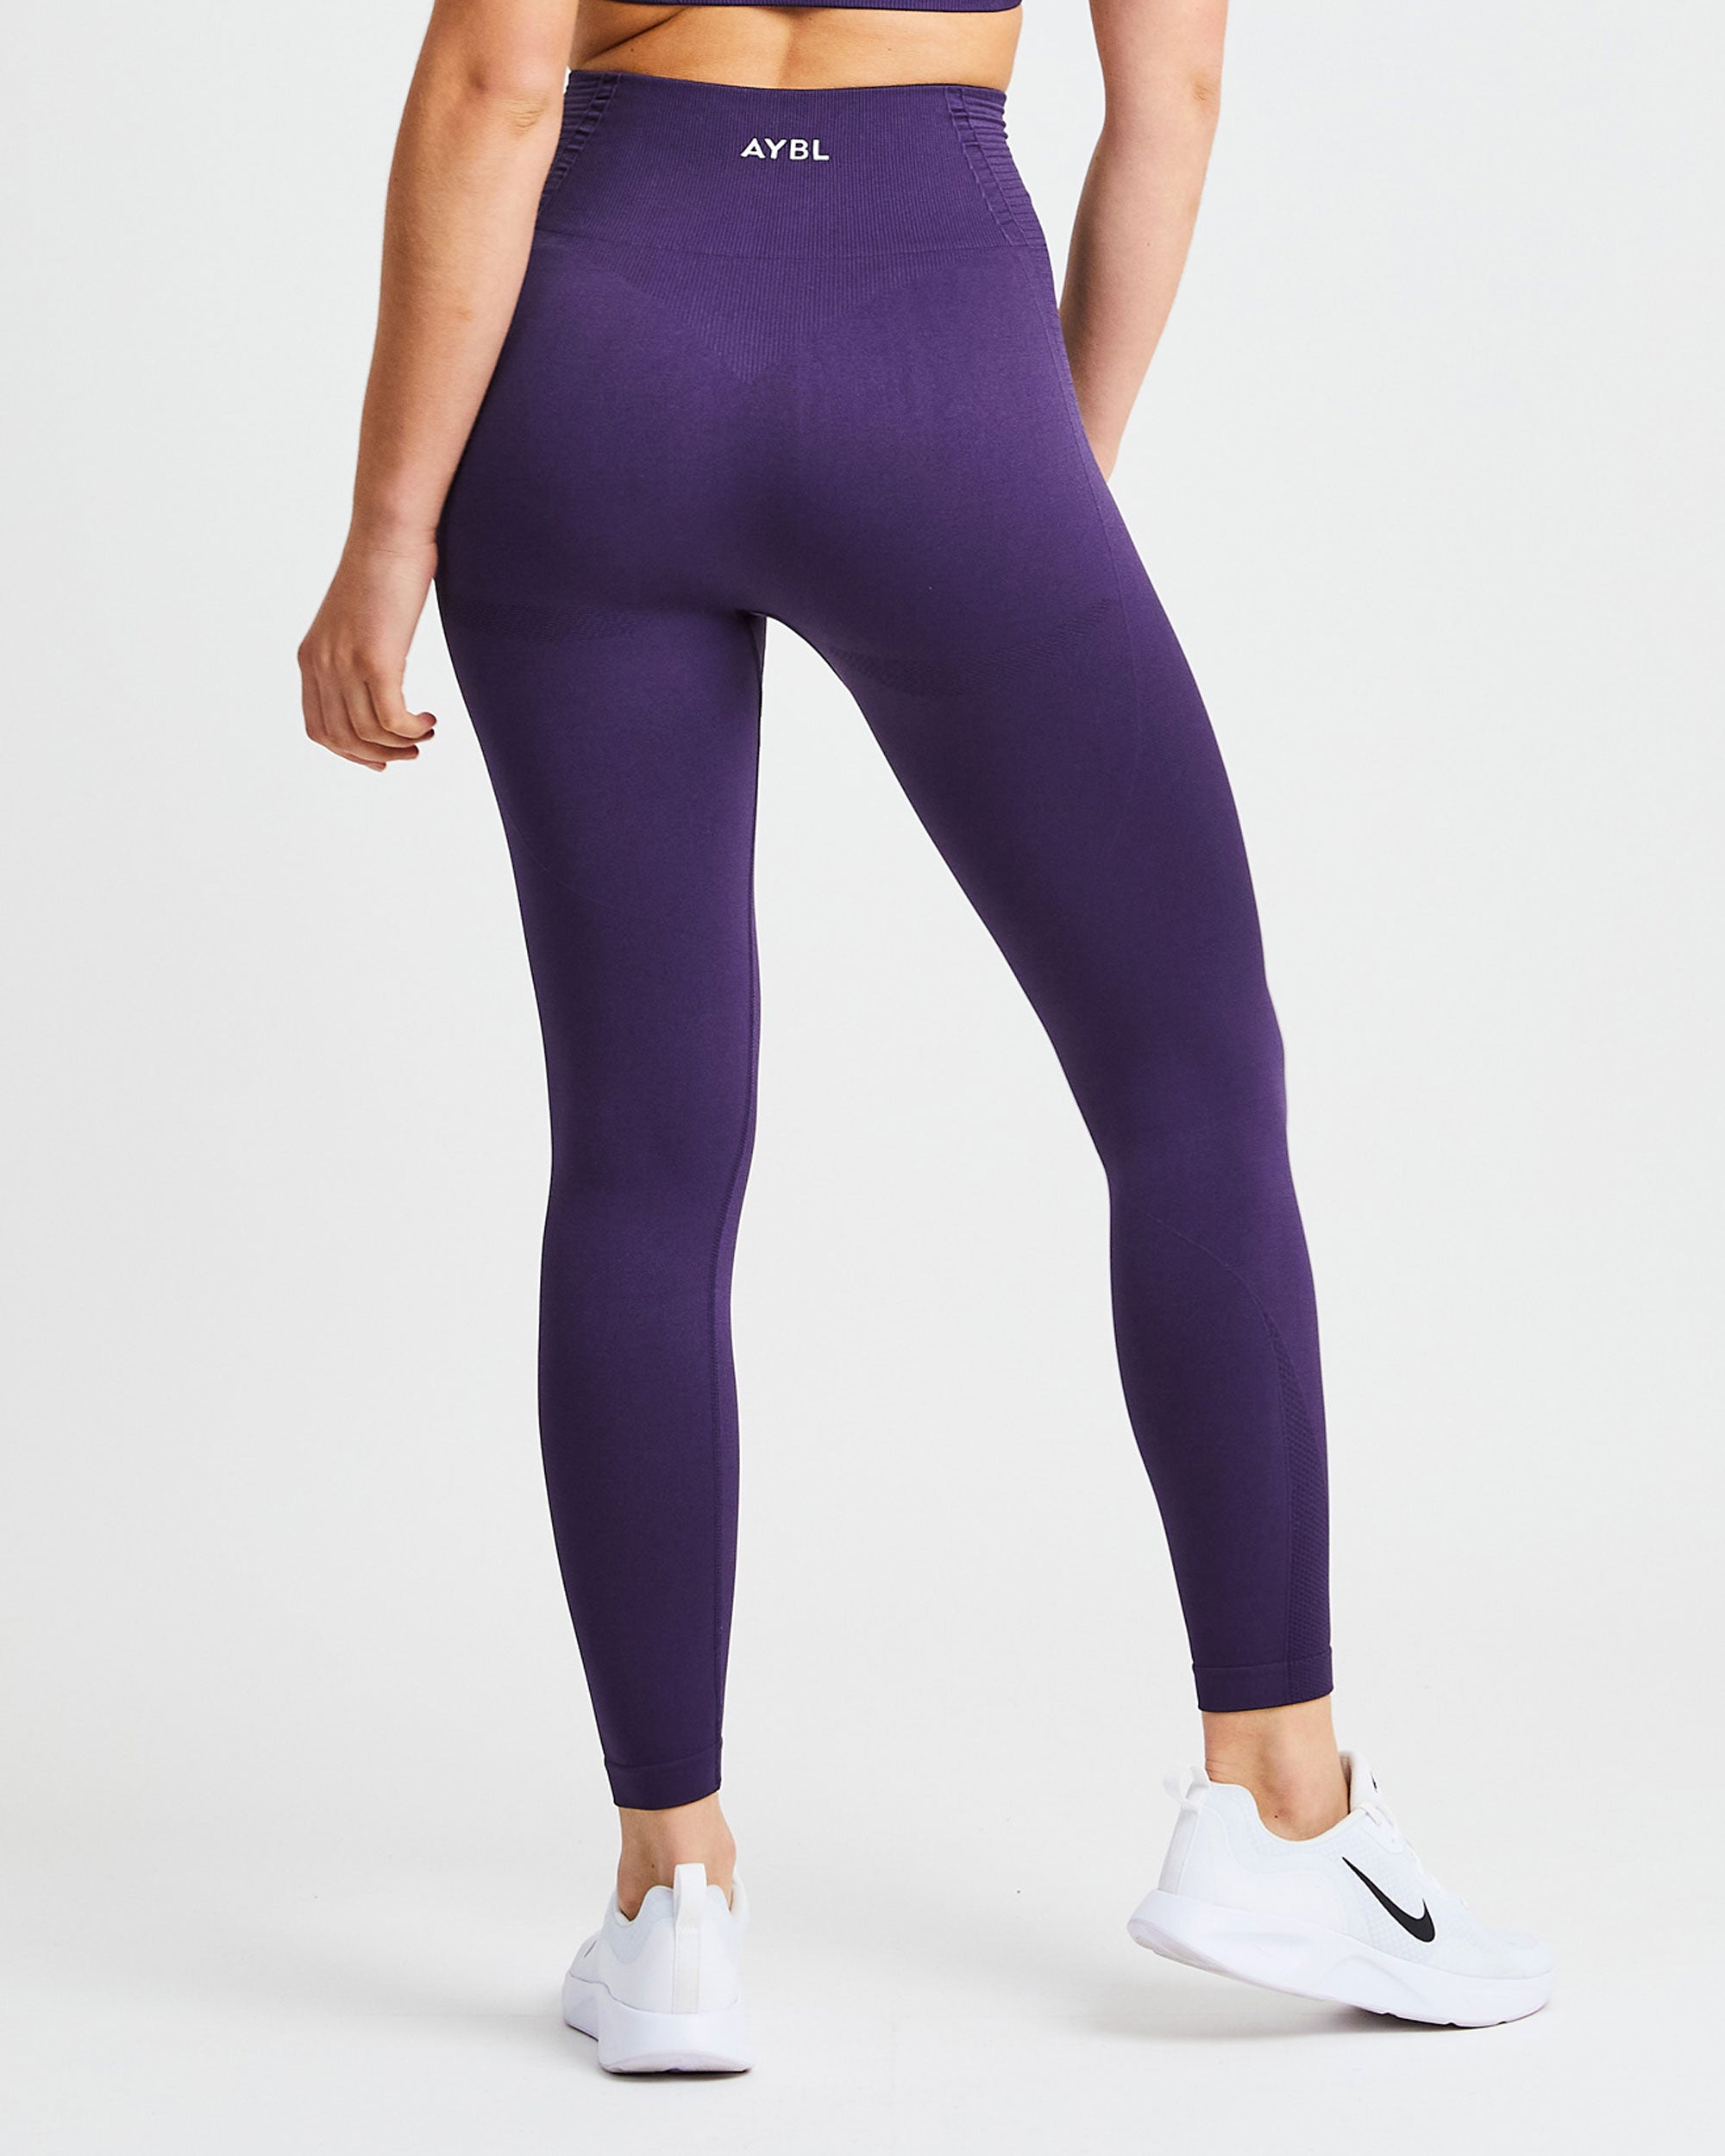 AYBL Pulse Seamless Purple Lilac Ombre Workout Running Gym Leggings Size XS  BNWT